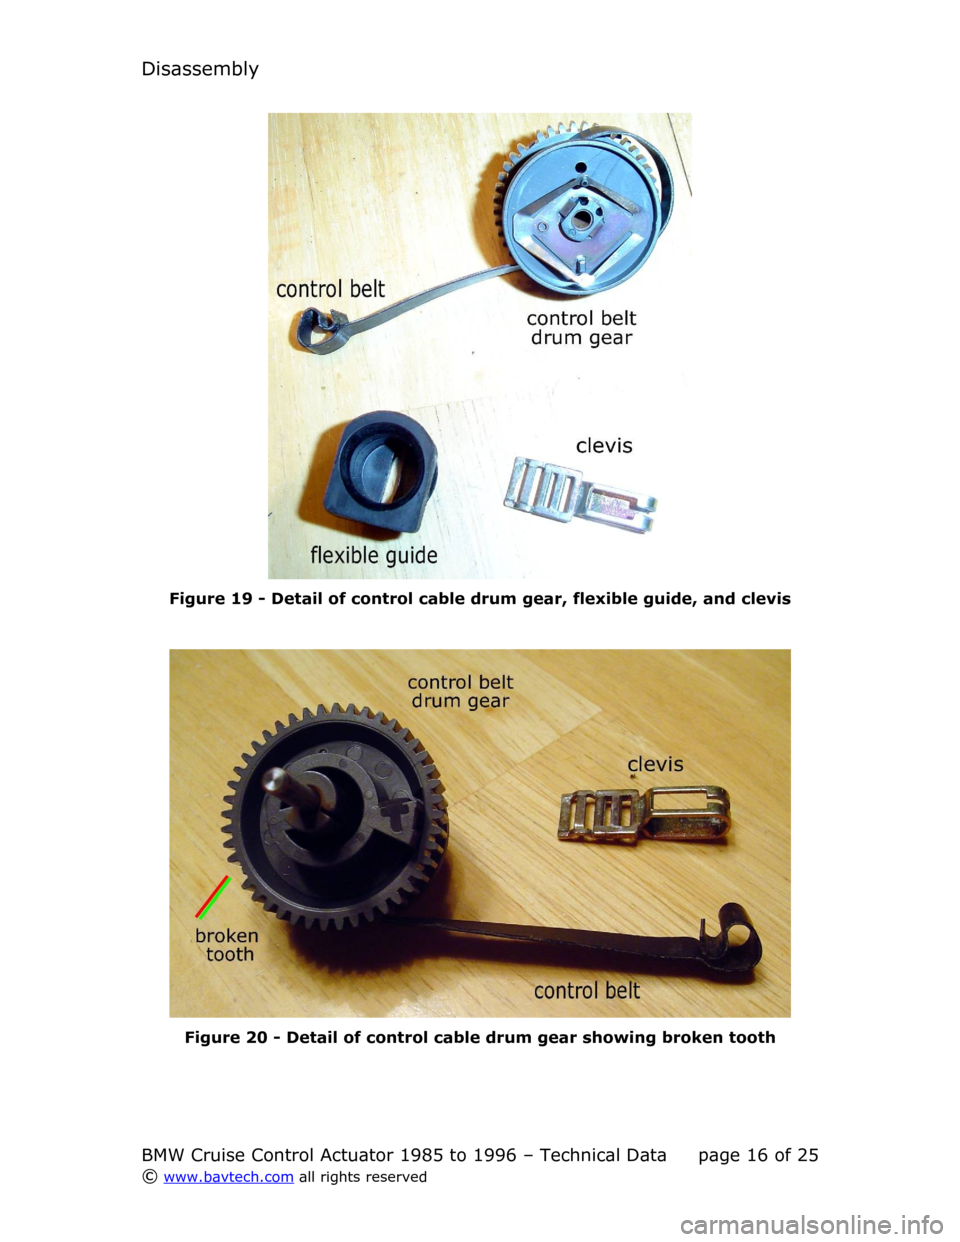 BMW 3 SERIES 1994 E36 Cruise Control Acutator Disassembly
Figure  19  - Detail of control cable drum gear, flexible guide, and clevis
Figure  20  - Detail of control cable drum gear showing broken tooth
BMW Cruise Control Actuator 1985 to 1996 �